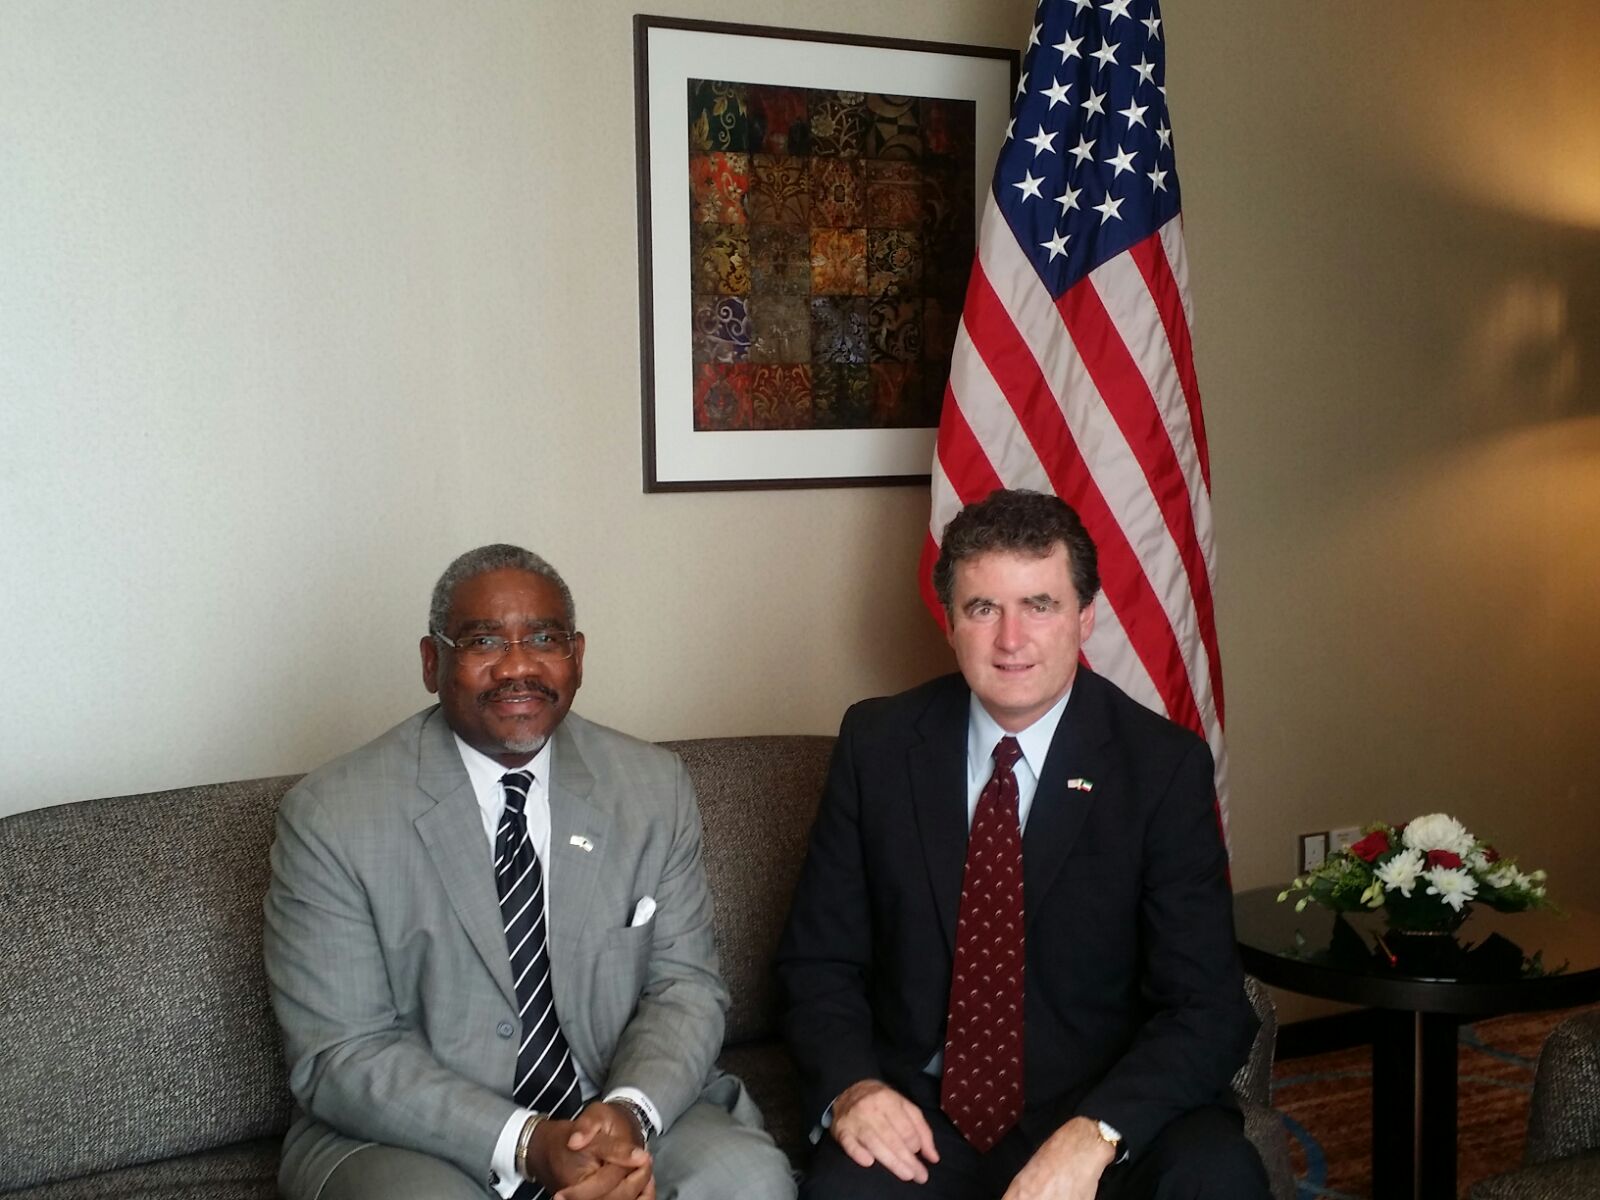 US Congressmen Michael Fitzpatrick (right) and Gregory Meeks